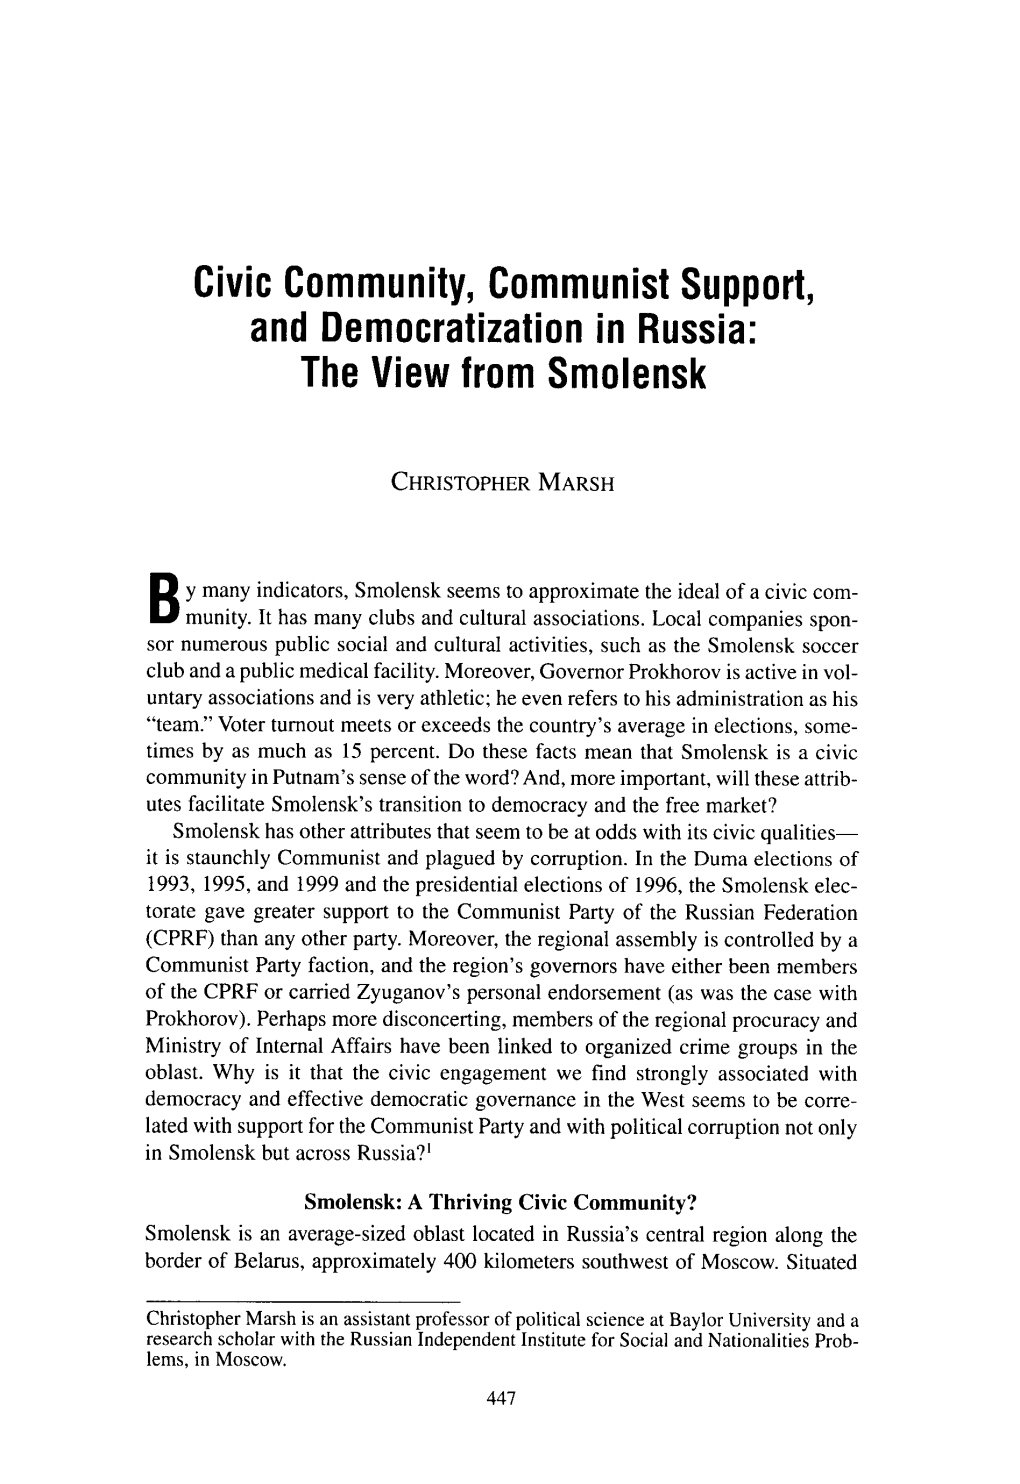 Civic Community, Communist Support, and Democratization in Russia: the View from Smolensk